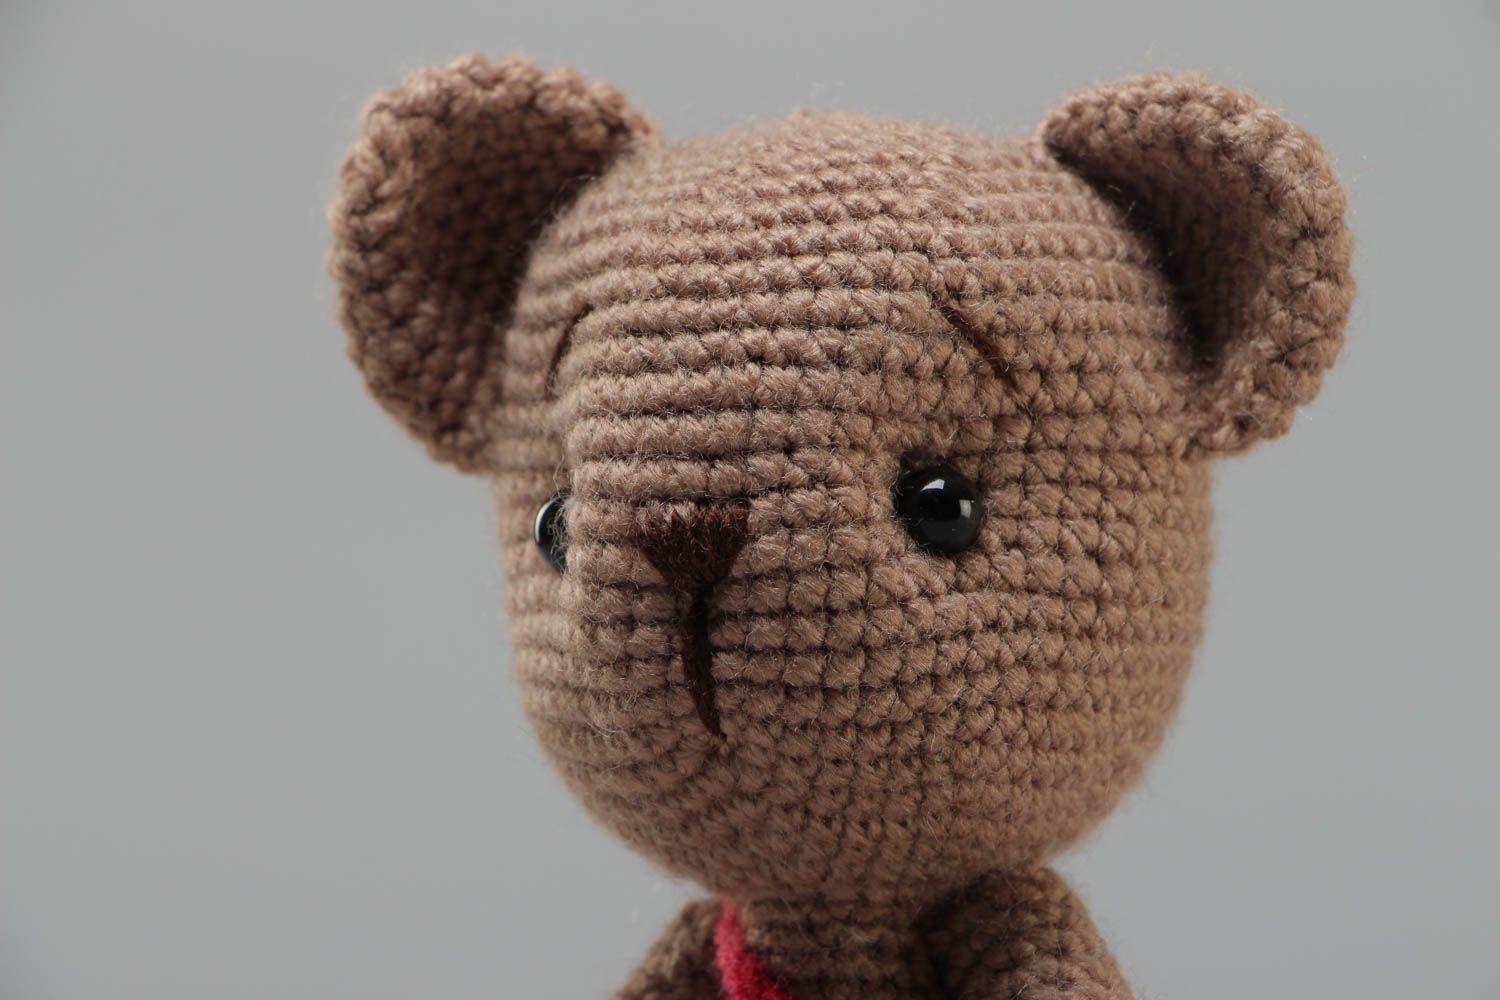 Small handcrafted soft crocheted teddybear for children made using knitting needle photo 3